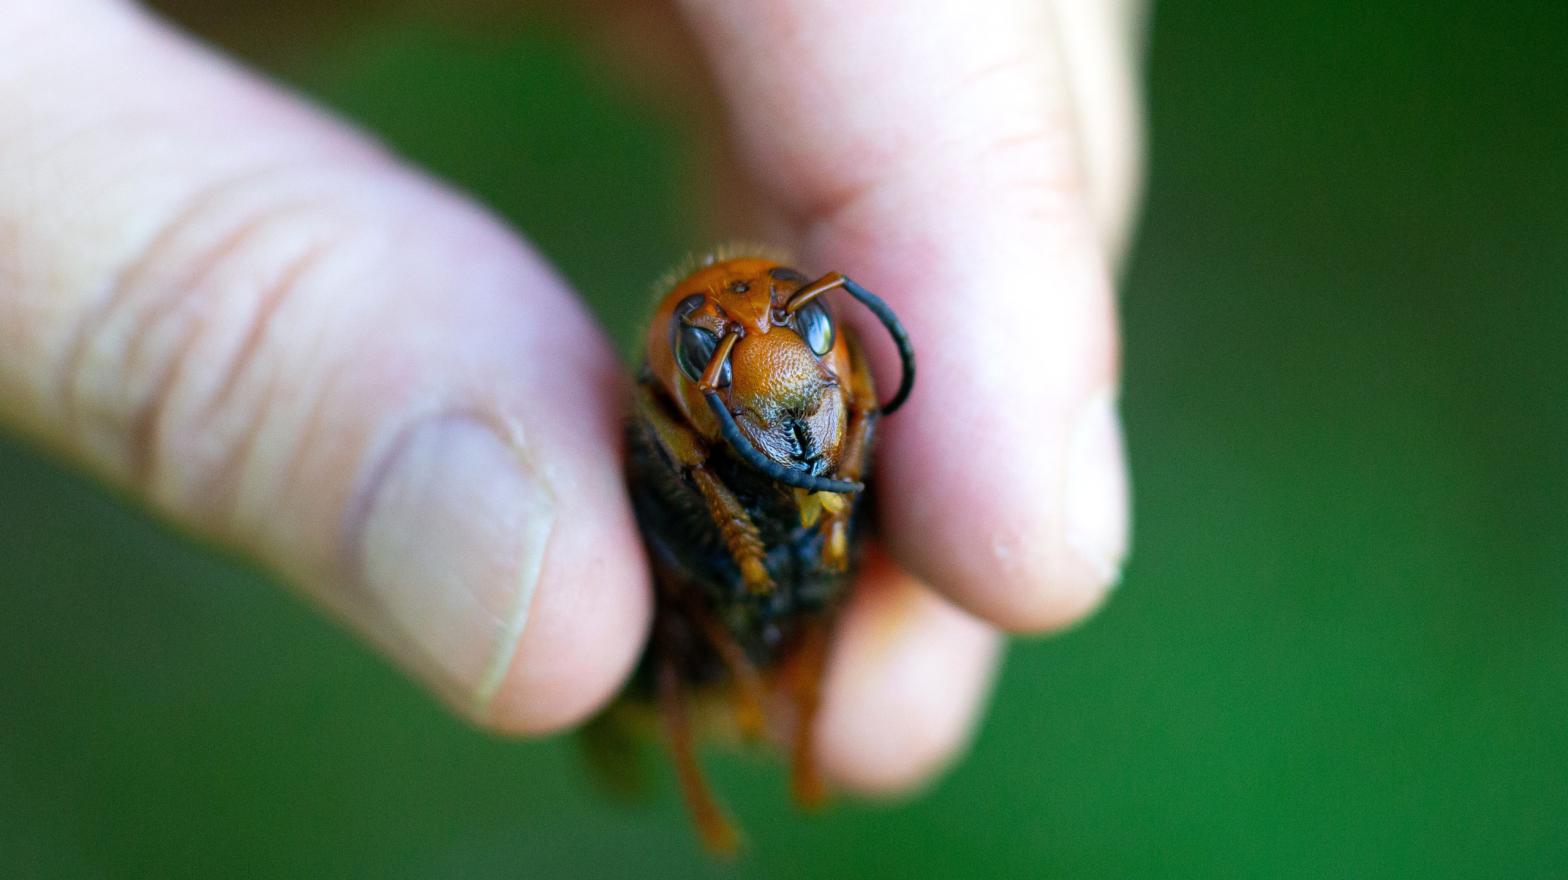 A pest biologist from the Washington State Department of Agriculture holds a dead Asian giant hornet on July 29, 2020 in Bellingham, Washington. (Photo: Karen Ducey, Getty Images)